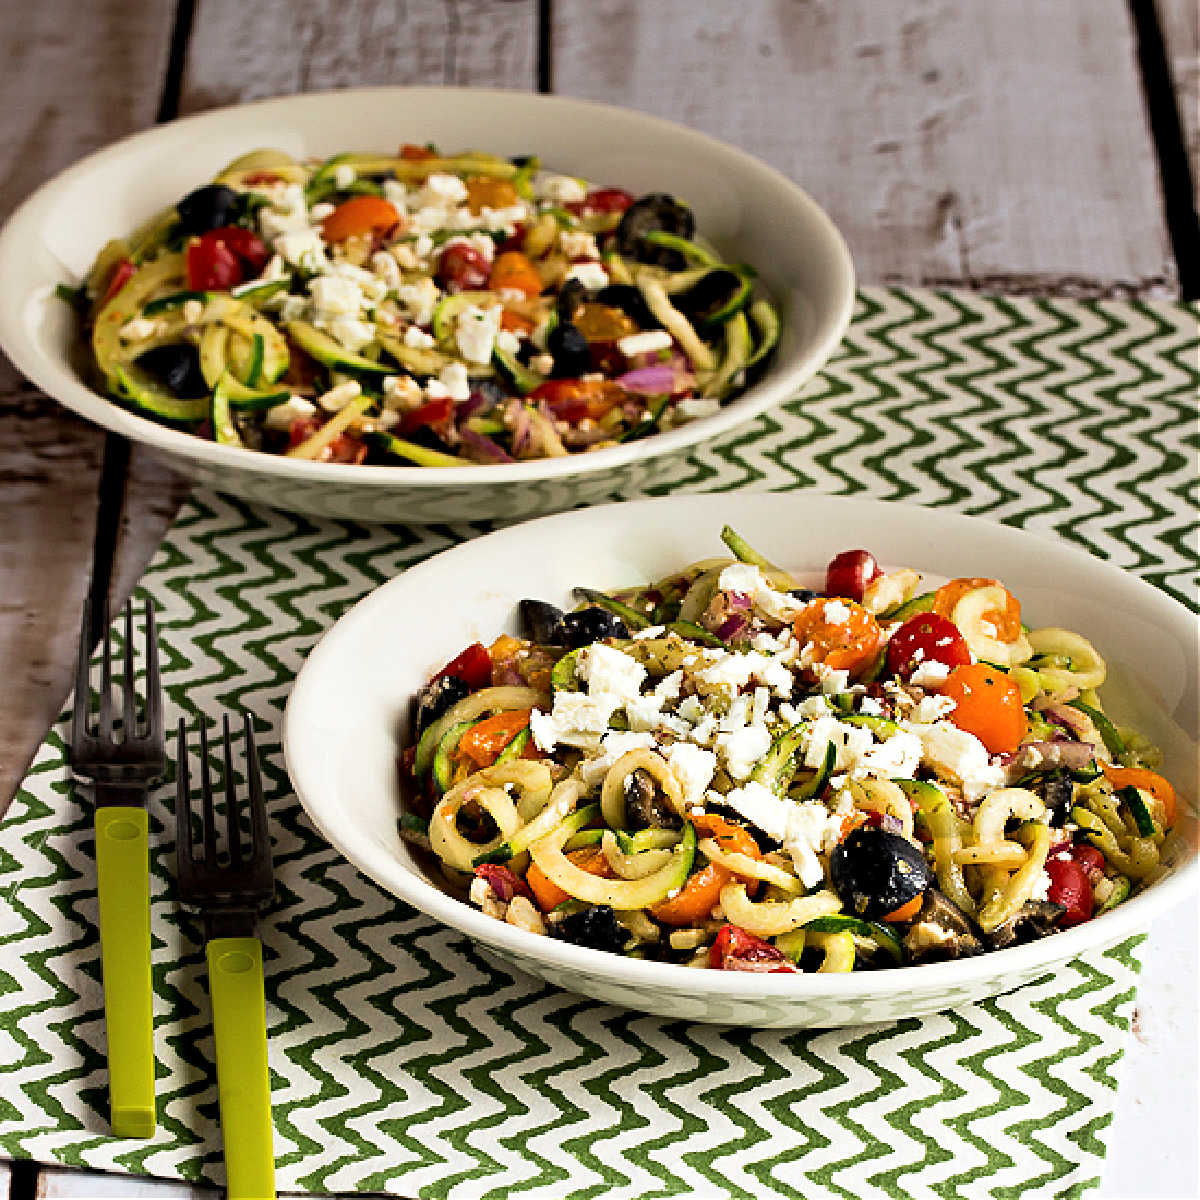 Greek style zucchini noodles presented in two serving bowls.